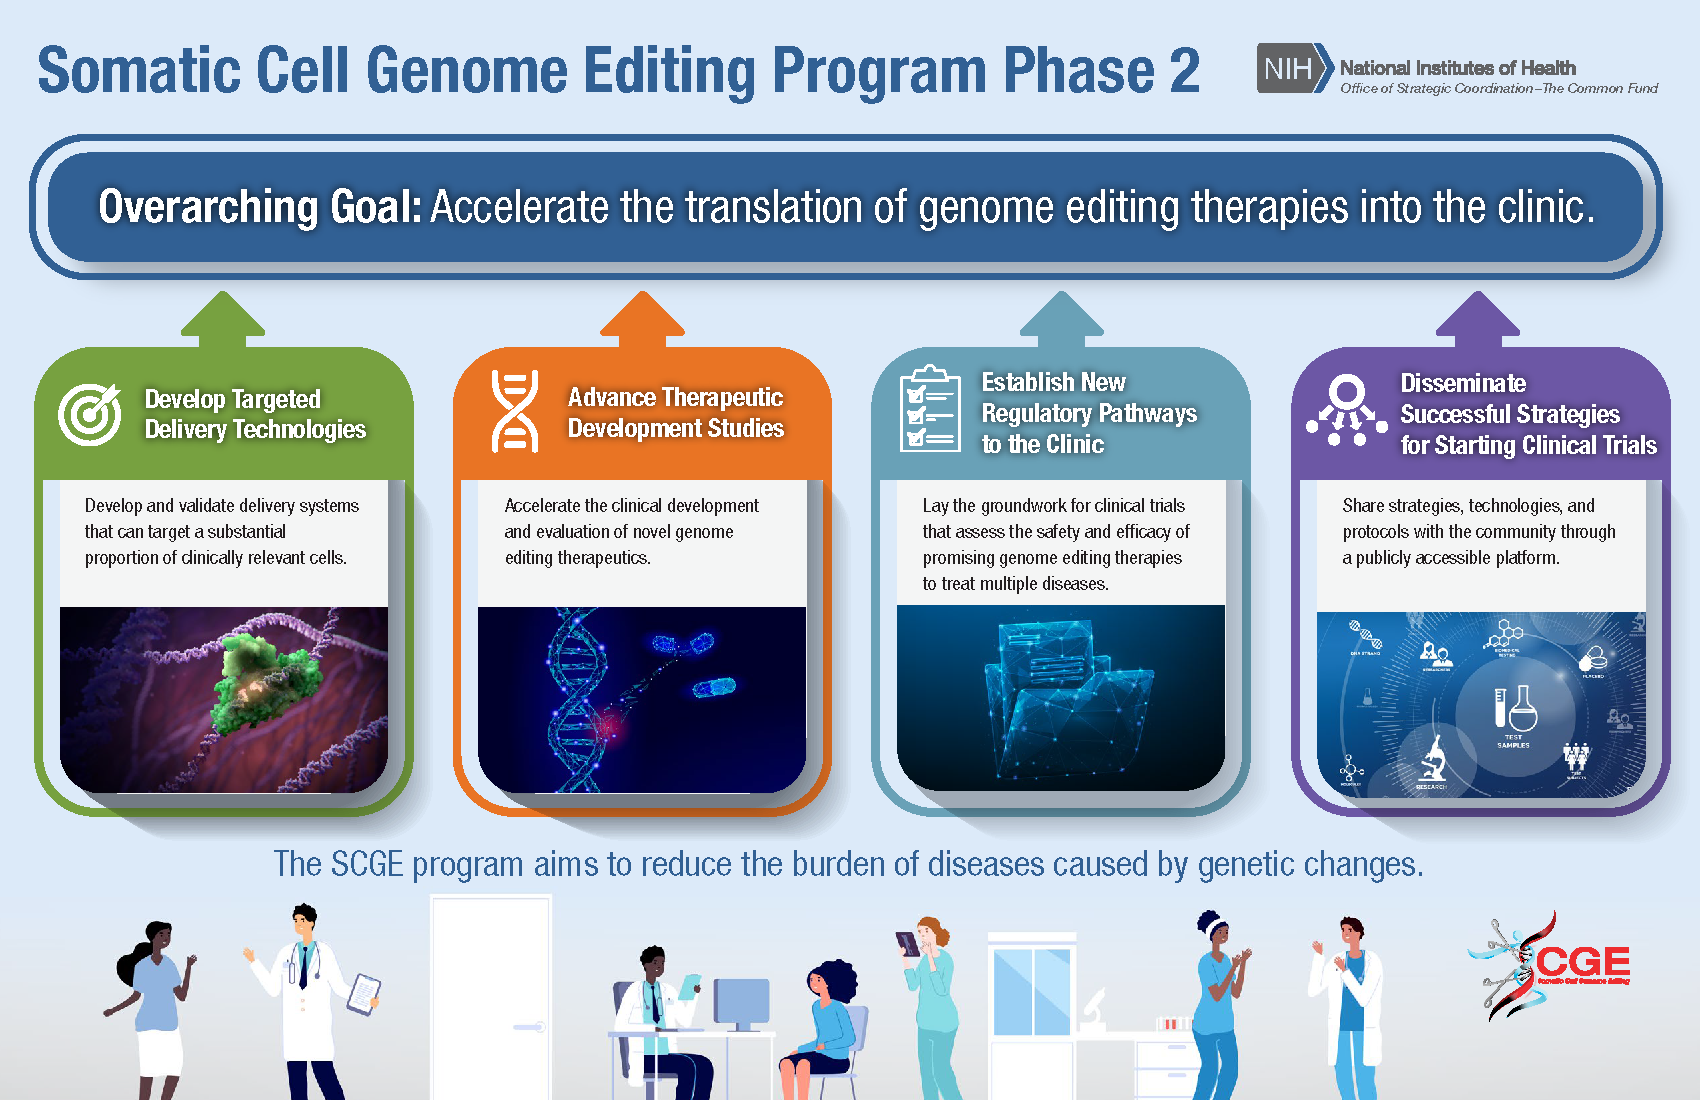 alt="Image: Flow chart of SCGE program goals and objectives. Text: Somatic Cell Genome Editing Program Phase 2. Develop targeted Delivery Technologies: develop and validate delivery systems that can target a substantial proportion of clinically relevant cells. Advance therapeutic development studies: accelerate the clinical development and evaluation of novel genome"